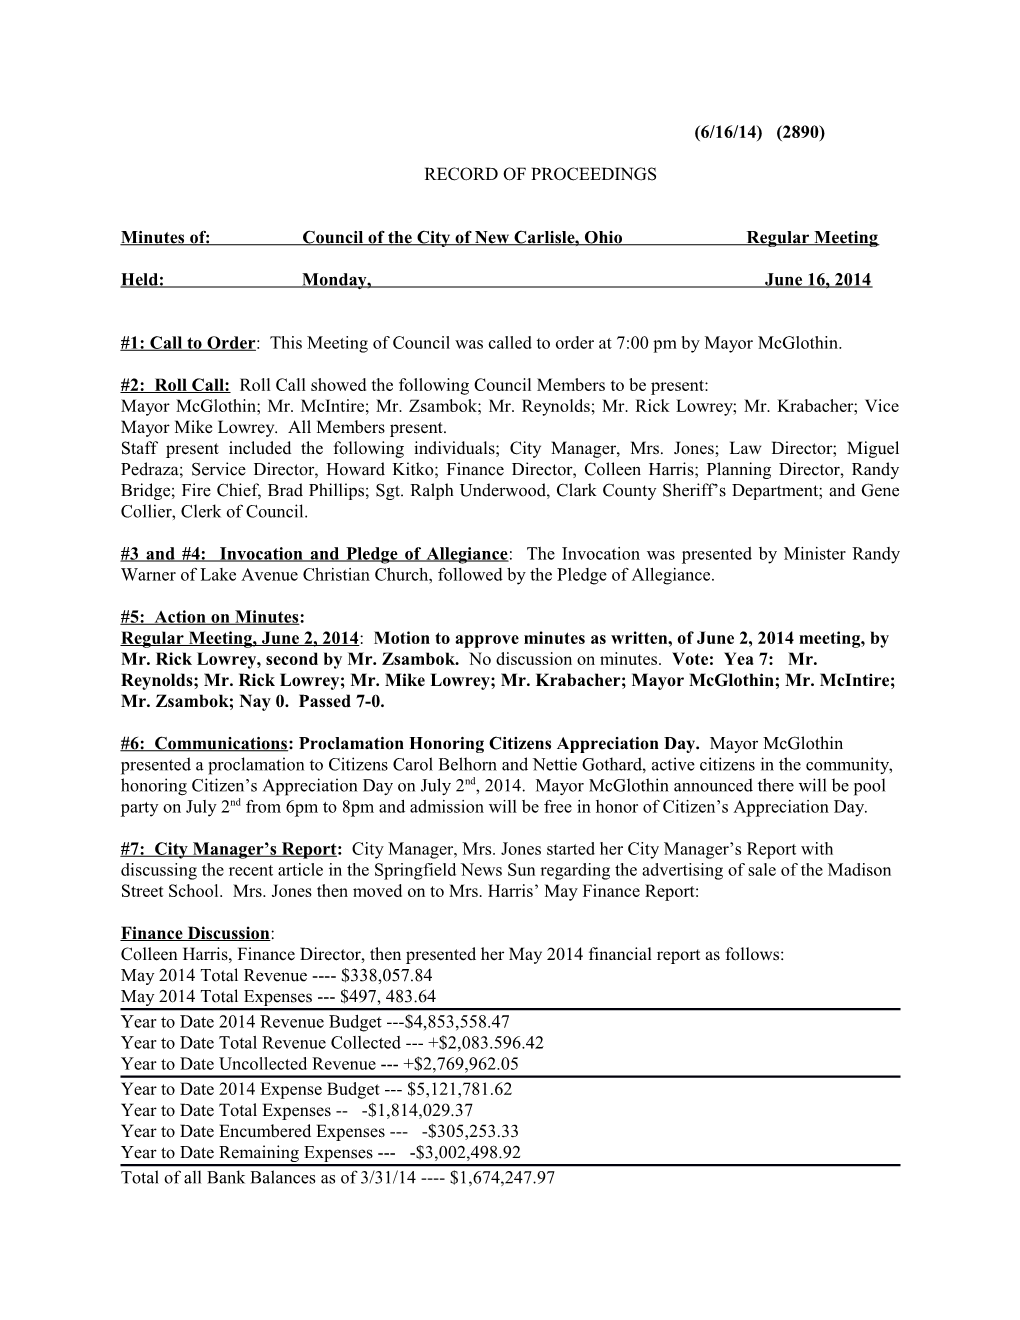 Minutes Of: Council of the City of New Carlisle, Ohio Regular Meeting